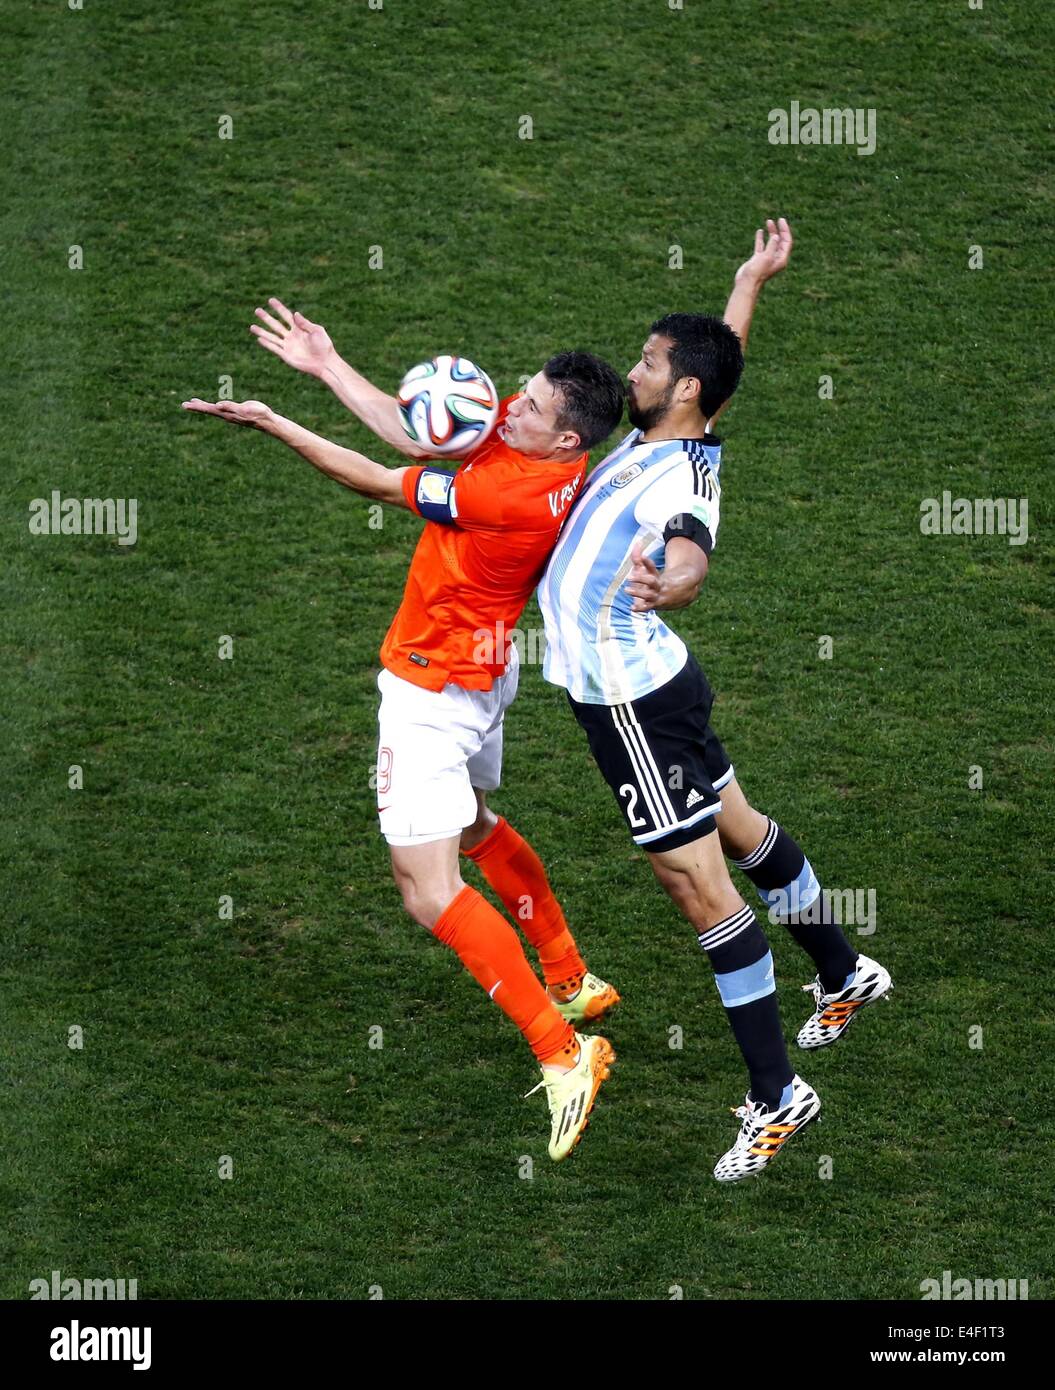 Sao Paulo, Brazil. 9th July, 2014. Netherlands' Robin van Persie vies with Argentina's Ezequiel Garay during a semifinal match between Netherlands and Argentina of 2014 FIFA World Cup at the Arena de Sao Paulo Stadium in Sao Paulo, Brazil, on July 9, 2014. Credit:  Liao Yujie/Xinhua/Alamy Live News Stock Photo